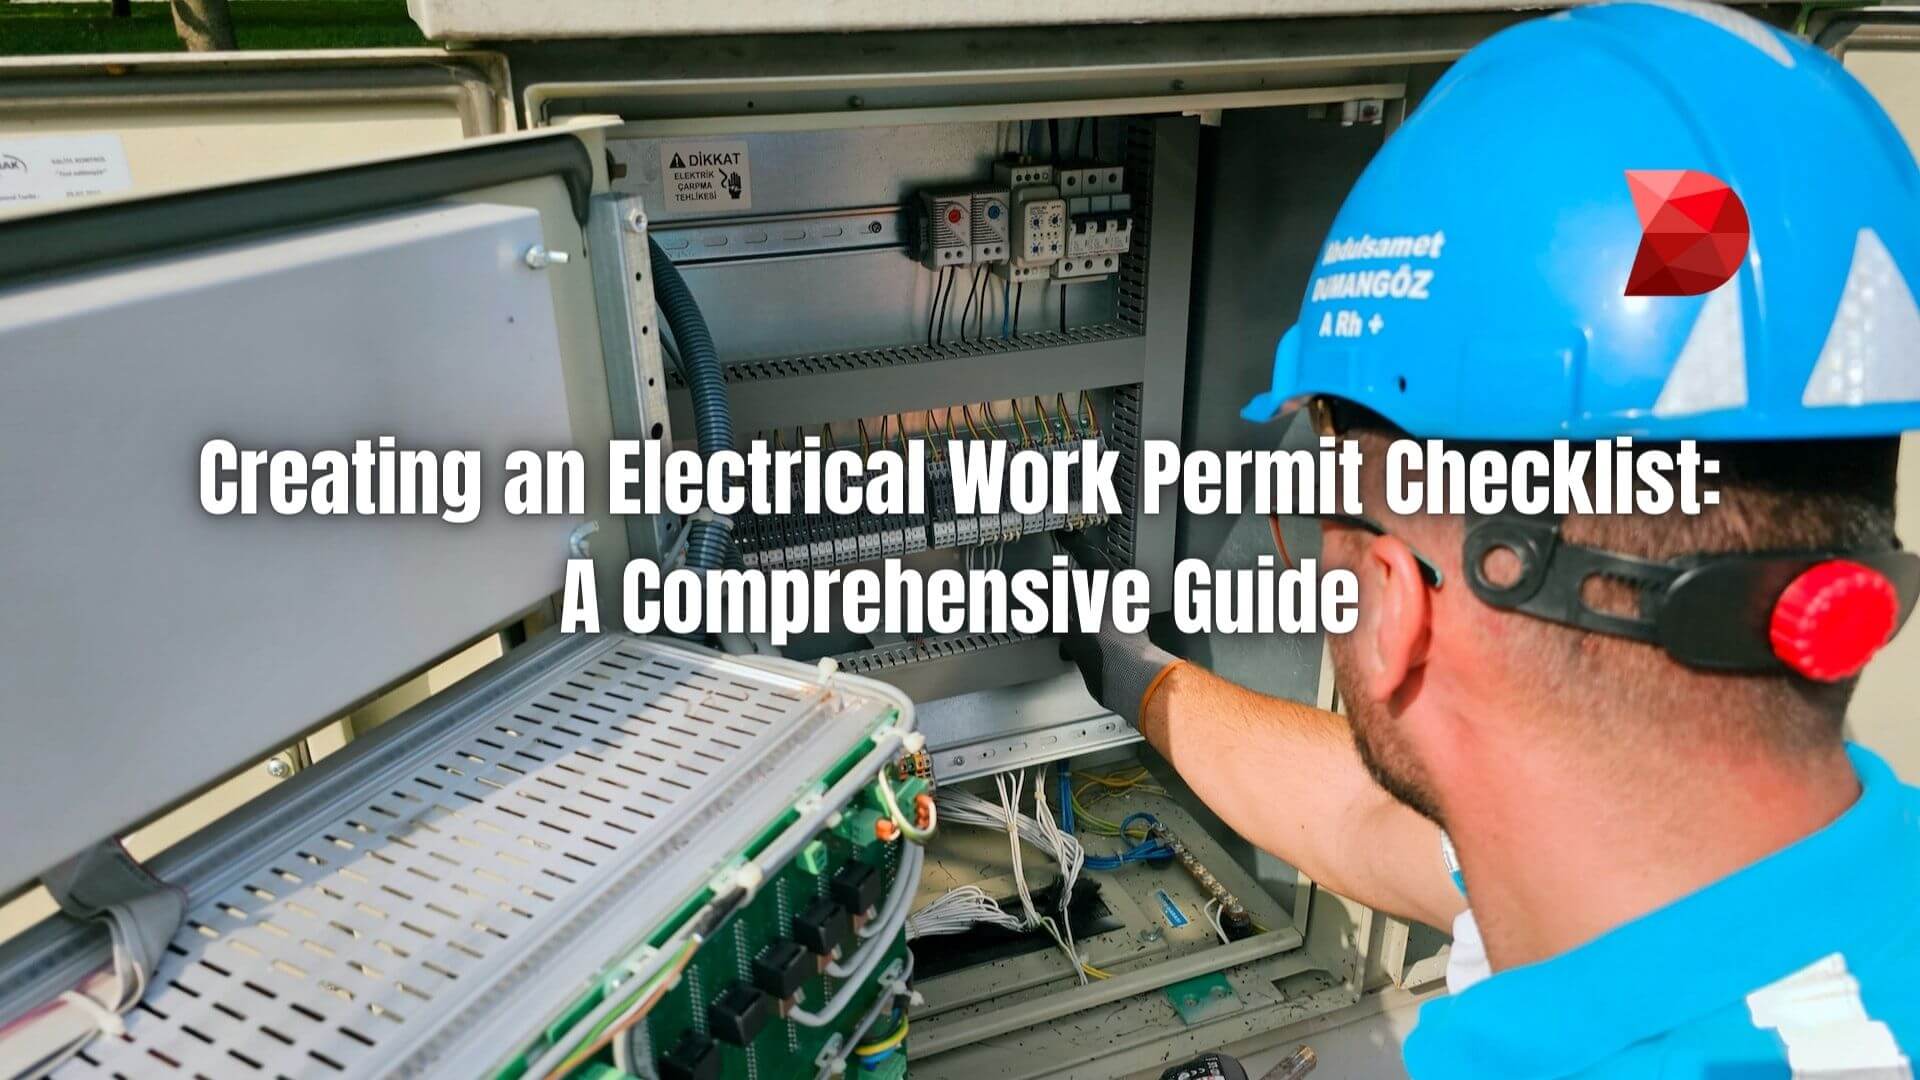 Creating an electrical work permit checklist helps professionals ensure permissions and safety measures are taken into account. Learn how!